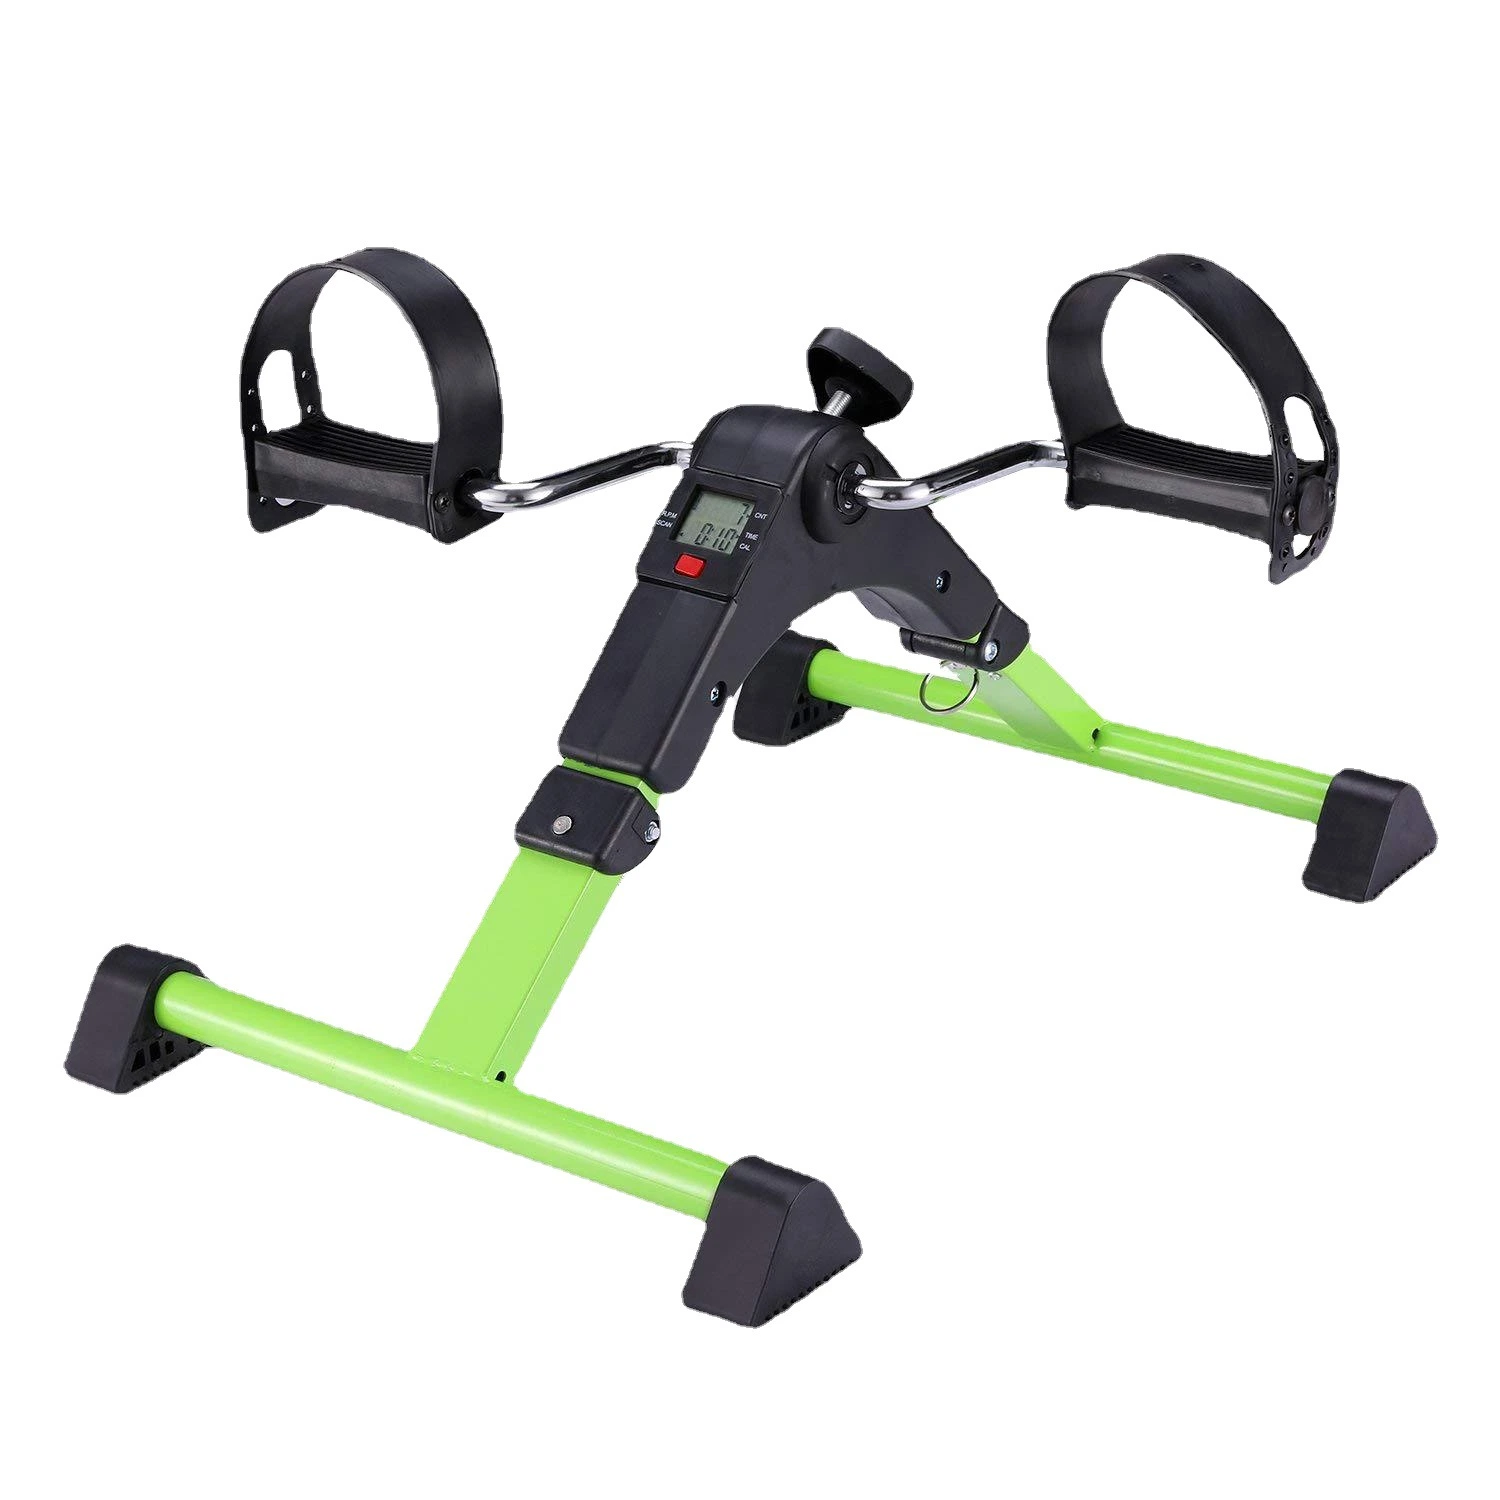 Manual Non-Customized Fitness Bike Indoor Trainer Mini Stepper Pedal Exerciser Manufacture Bme 008